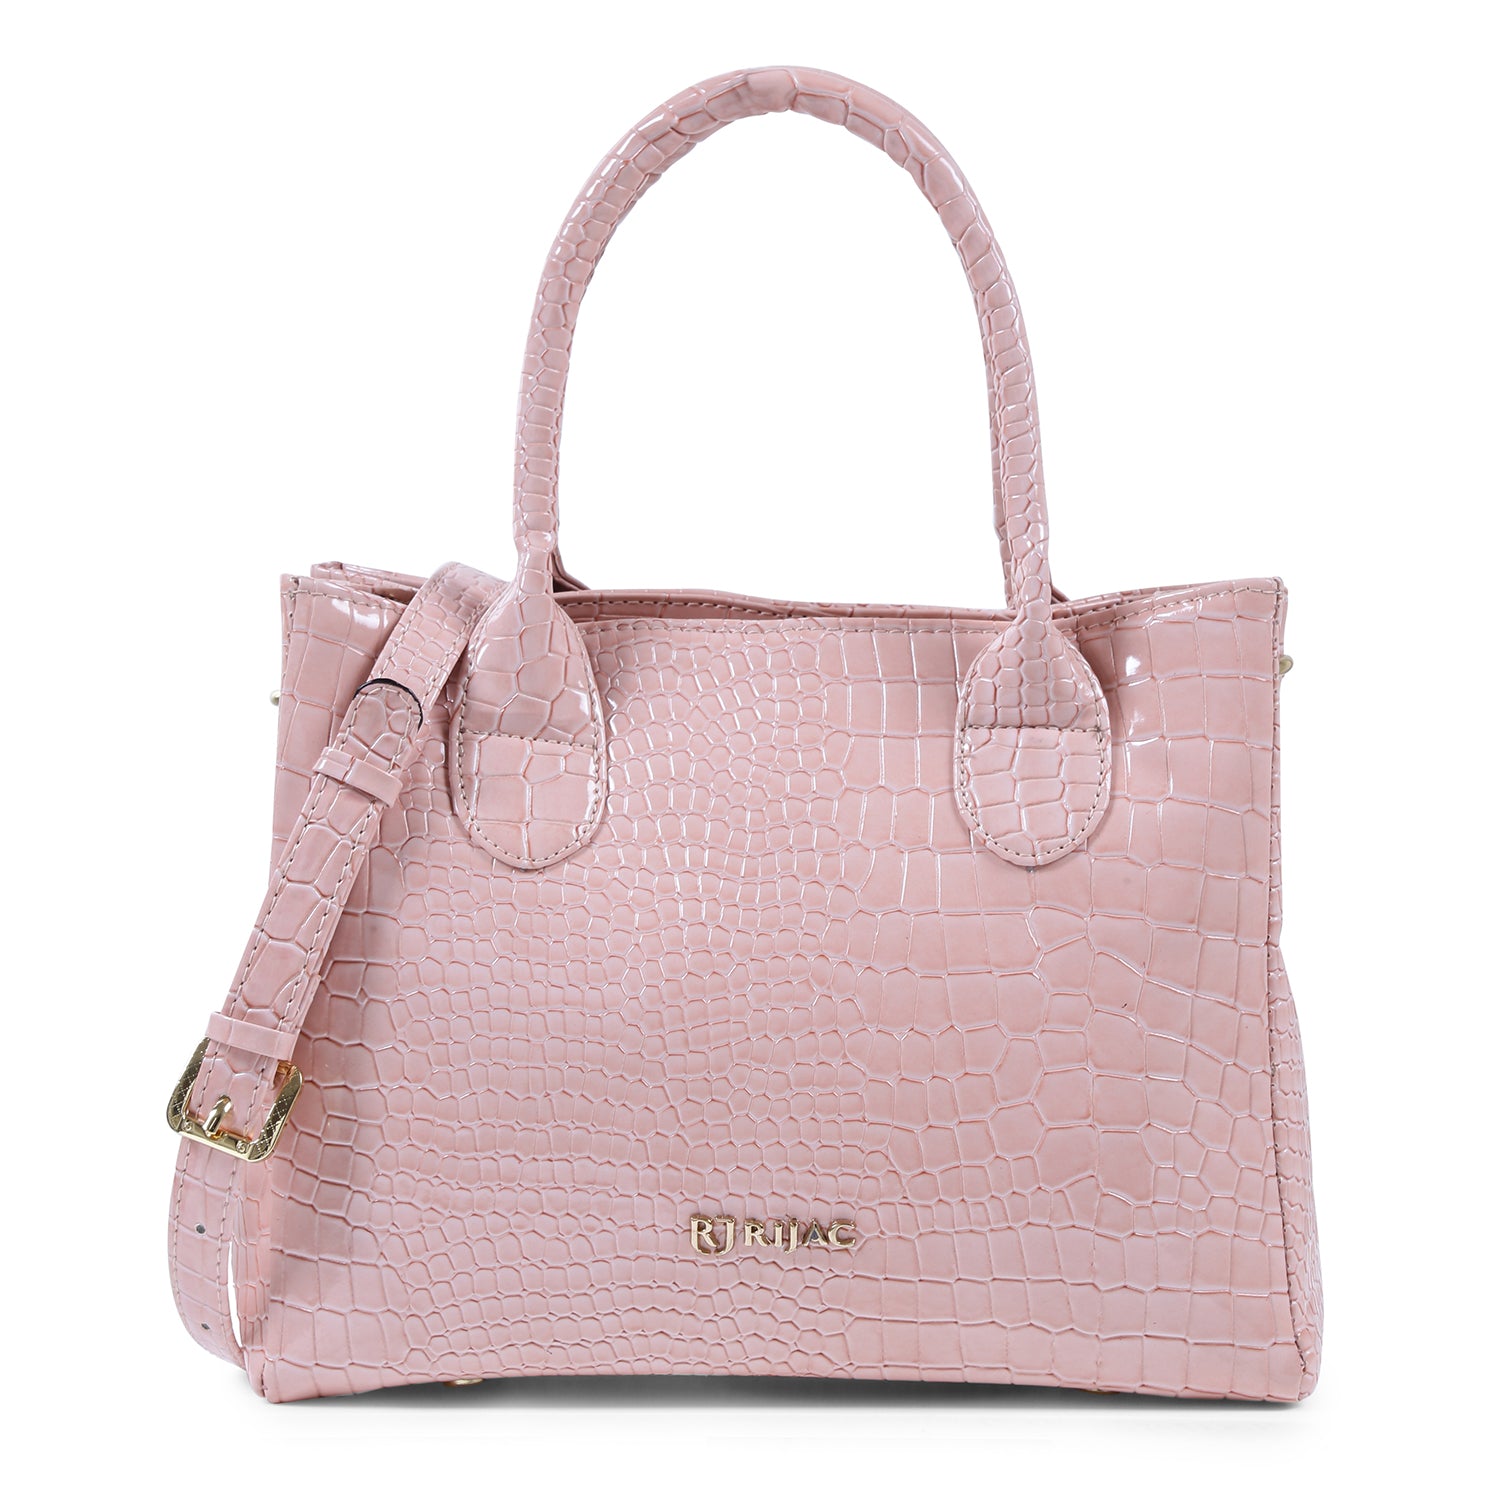 The pink embossed tote bag.